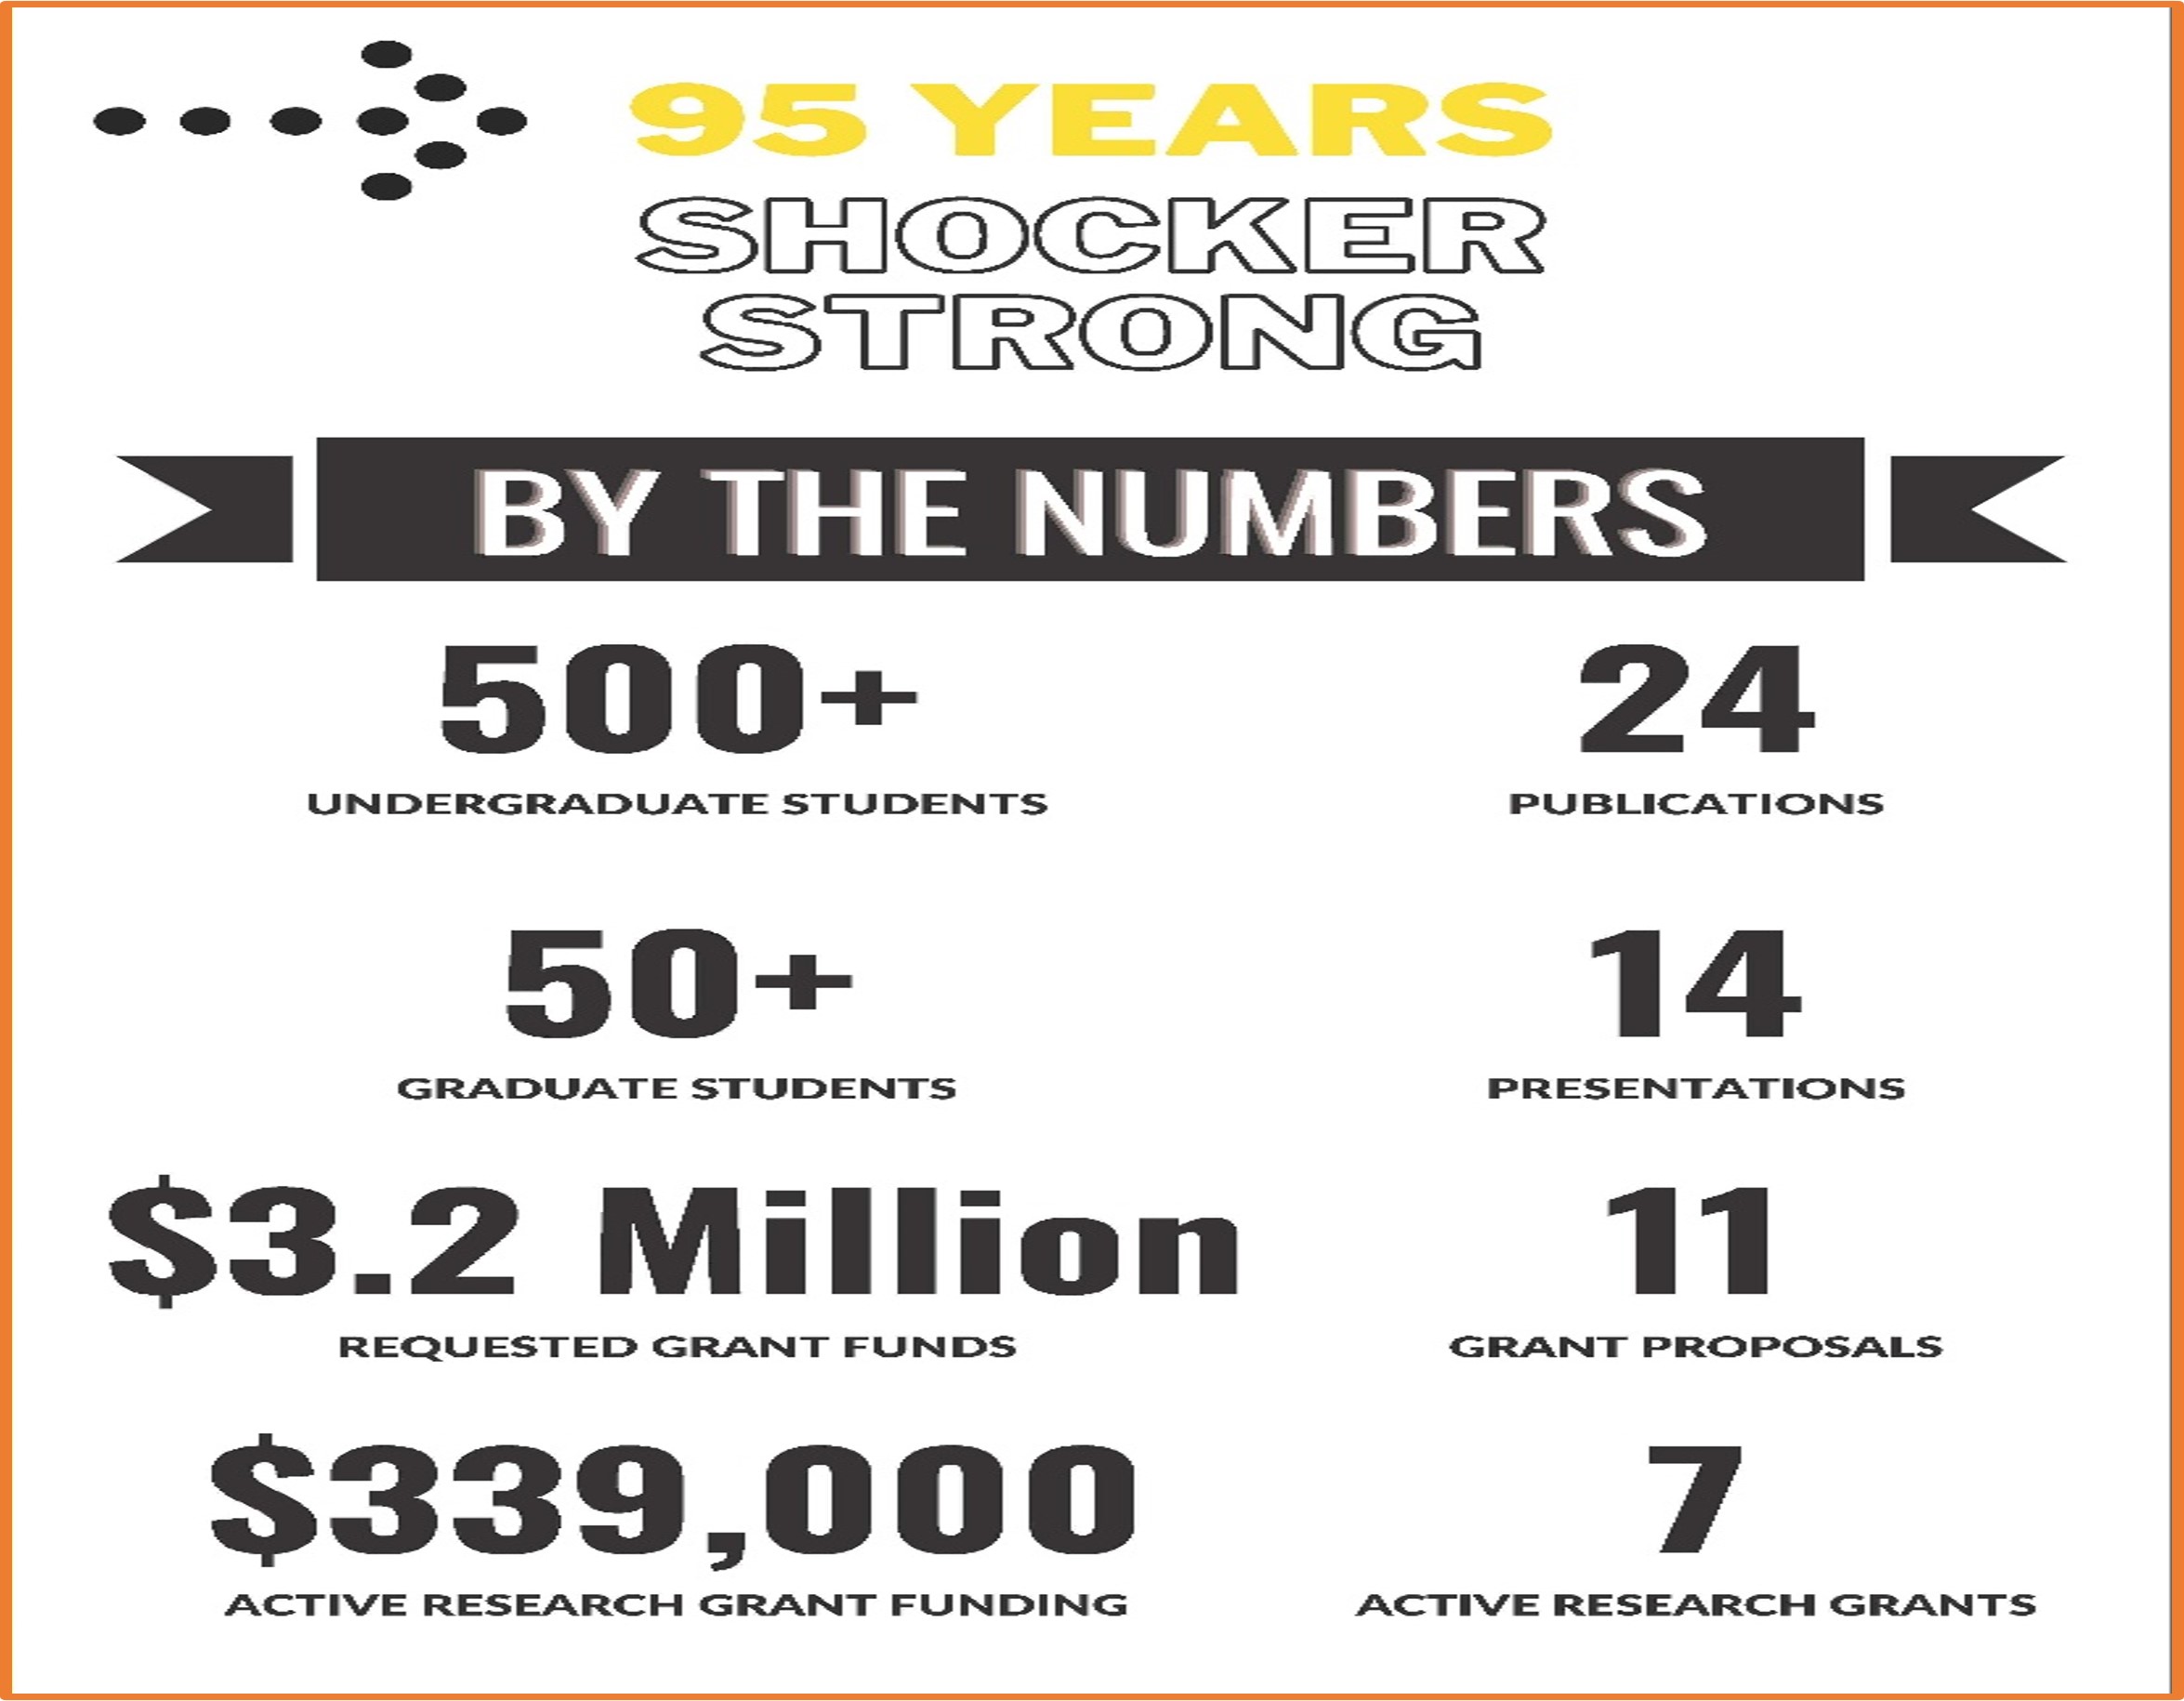 Department of Psychology / 95 Years Shocker Strong: By the numbers / 500+ undergraduate students / 50+ graduate students / $3.2 million in requested grant funds / $339,000 in active research grant funding / 24 publications / 14 presentations / 11 grant proposals / 7 active research grants